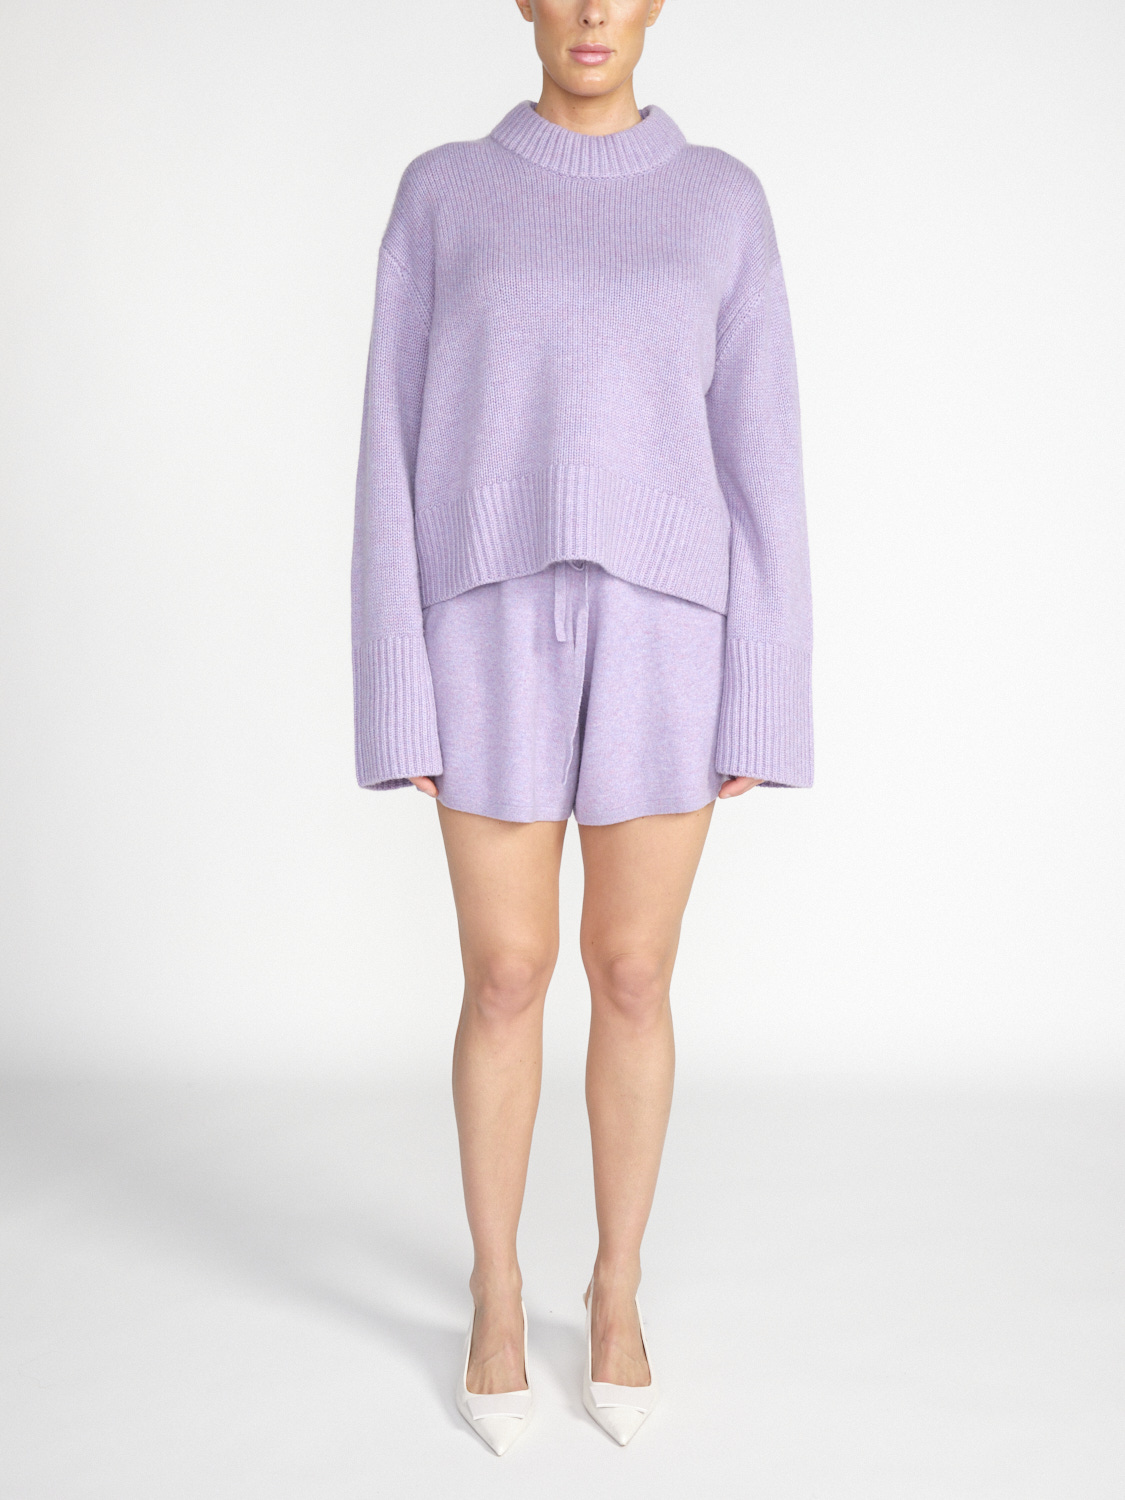 Lisa Yang Sony – Kurzer Cashmere Pullover   lila Taille unique